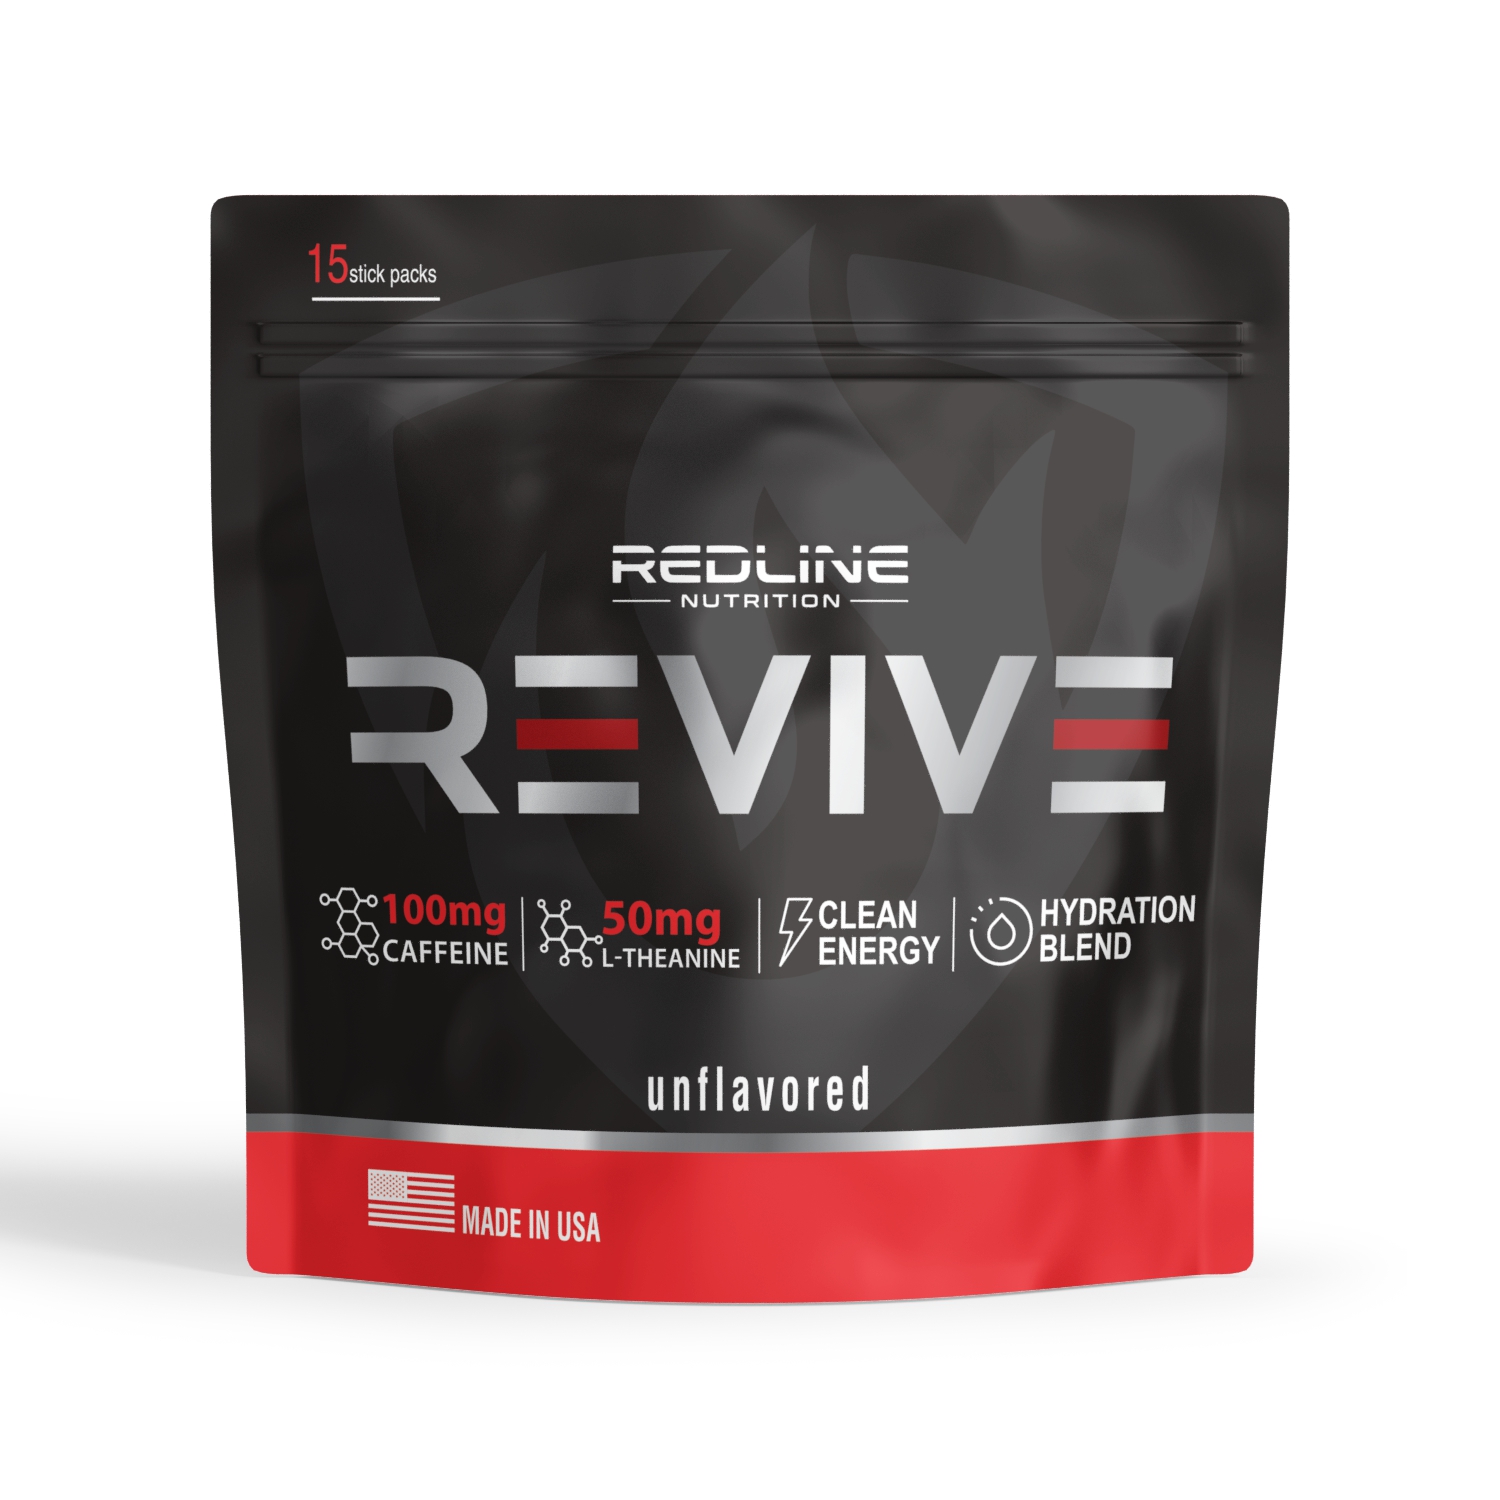 Packaging Design: Revive - A sleek and contemporary packaging design concept for Revive, featuring minimalist aesthetics and vibrant accents.